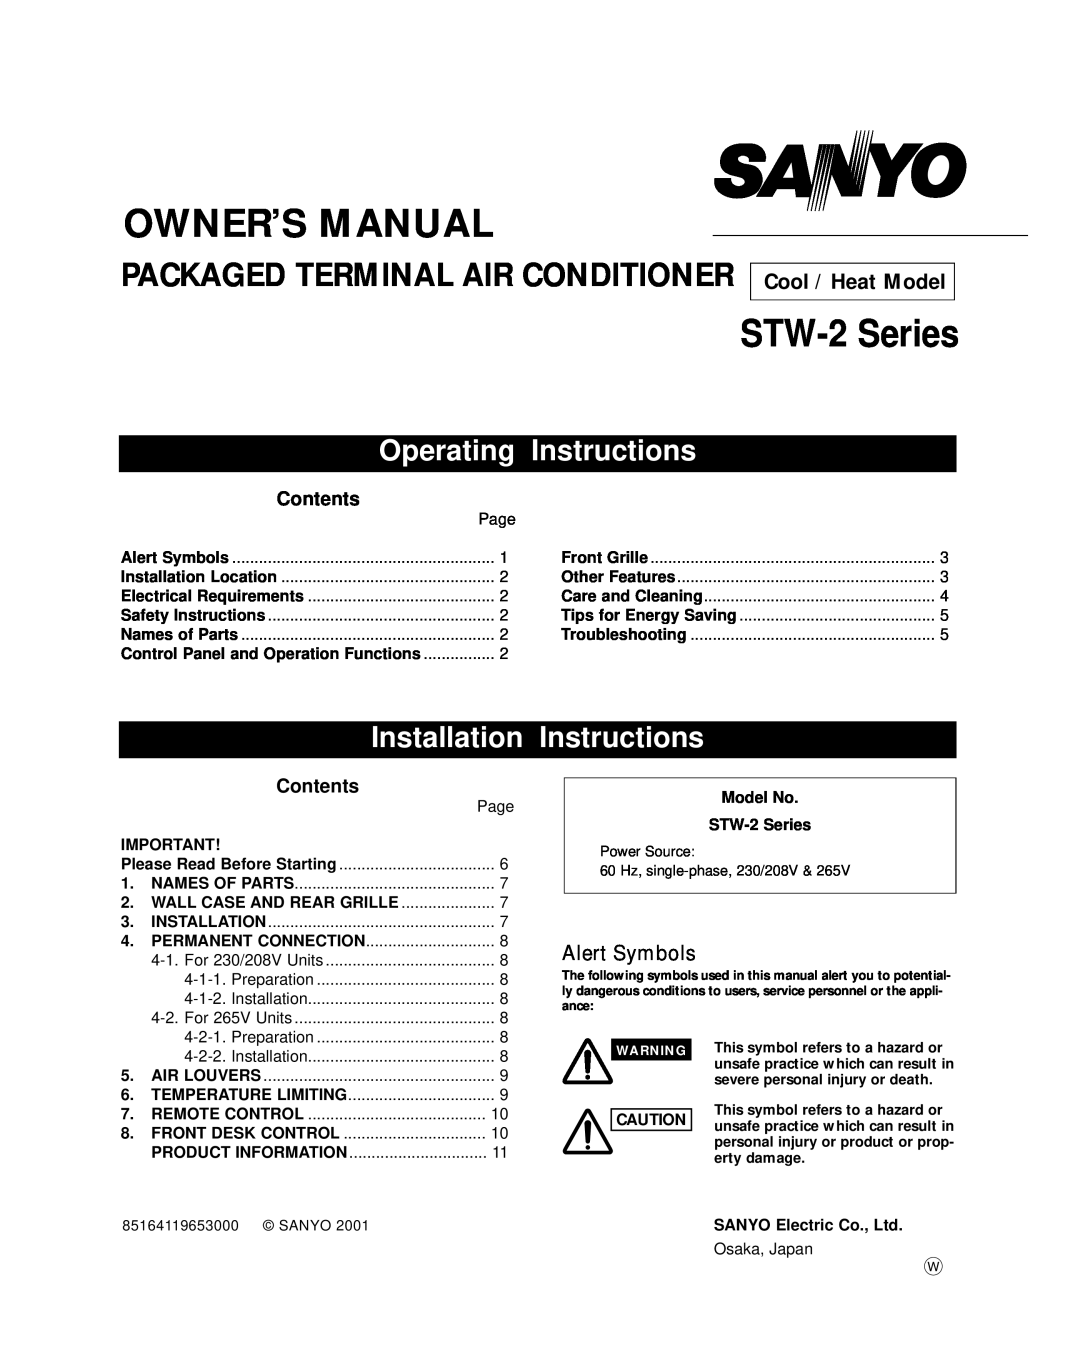 Sanyo owner manual Alert Symbols, Wall Case And Rear Grille, Model No STW-2 Series, Owner’S Manual, Operating, Contents 